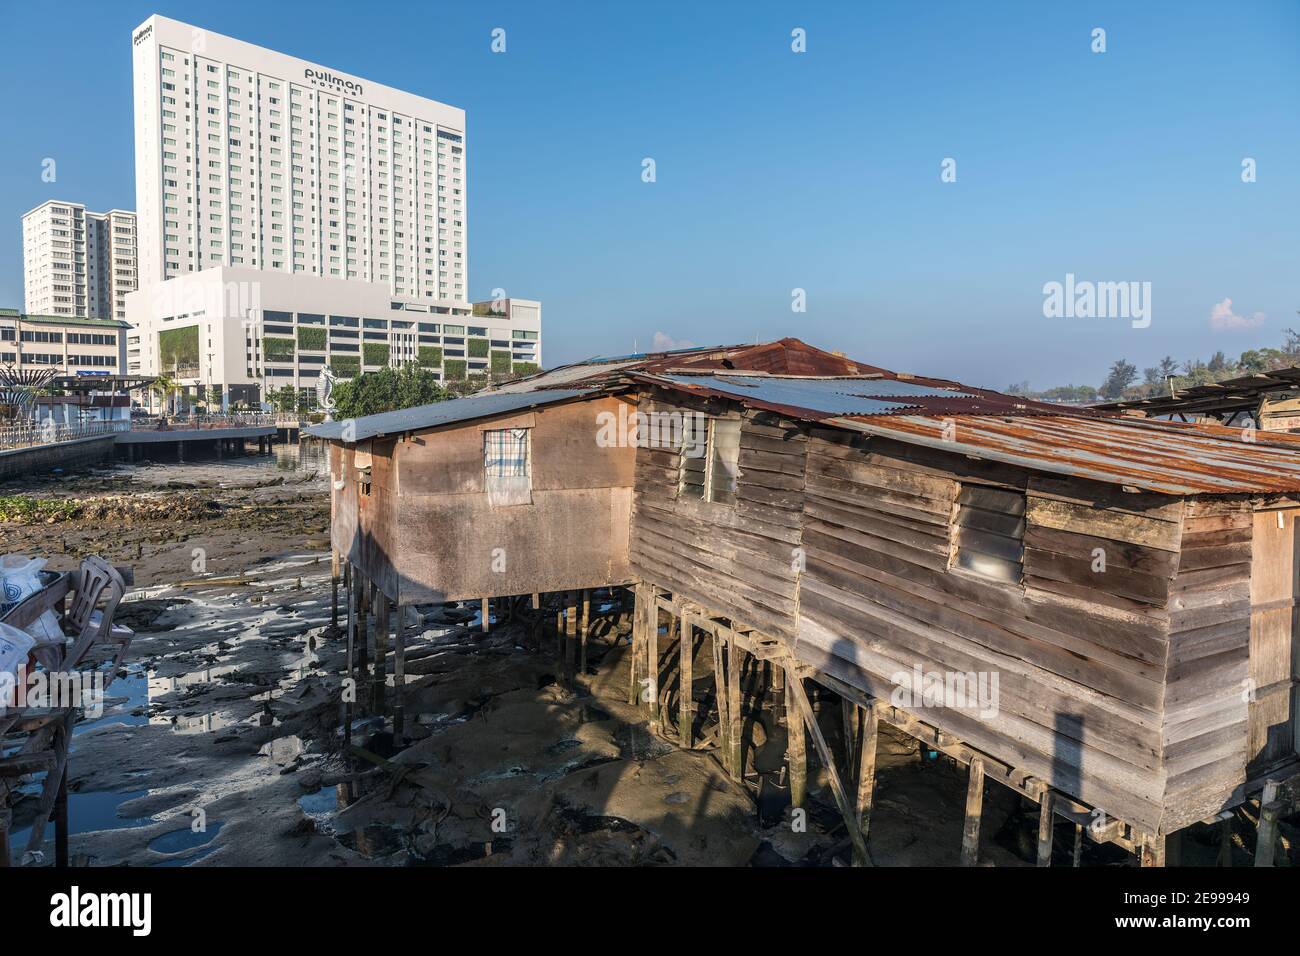 New and old, modern hotel and local shacks used by fishermen, Miri, Malaysia Stock Photo